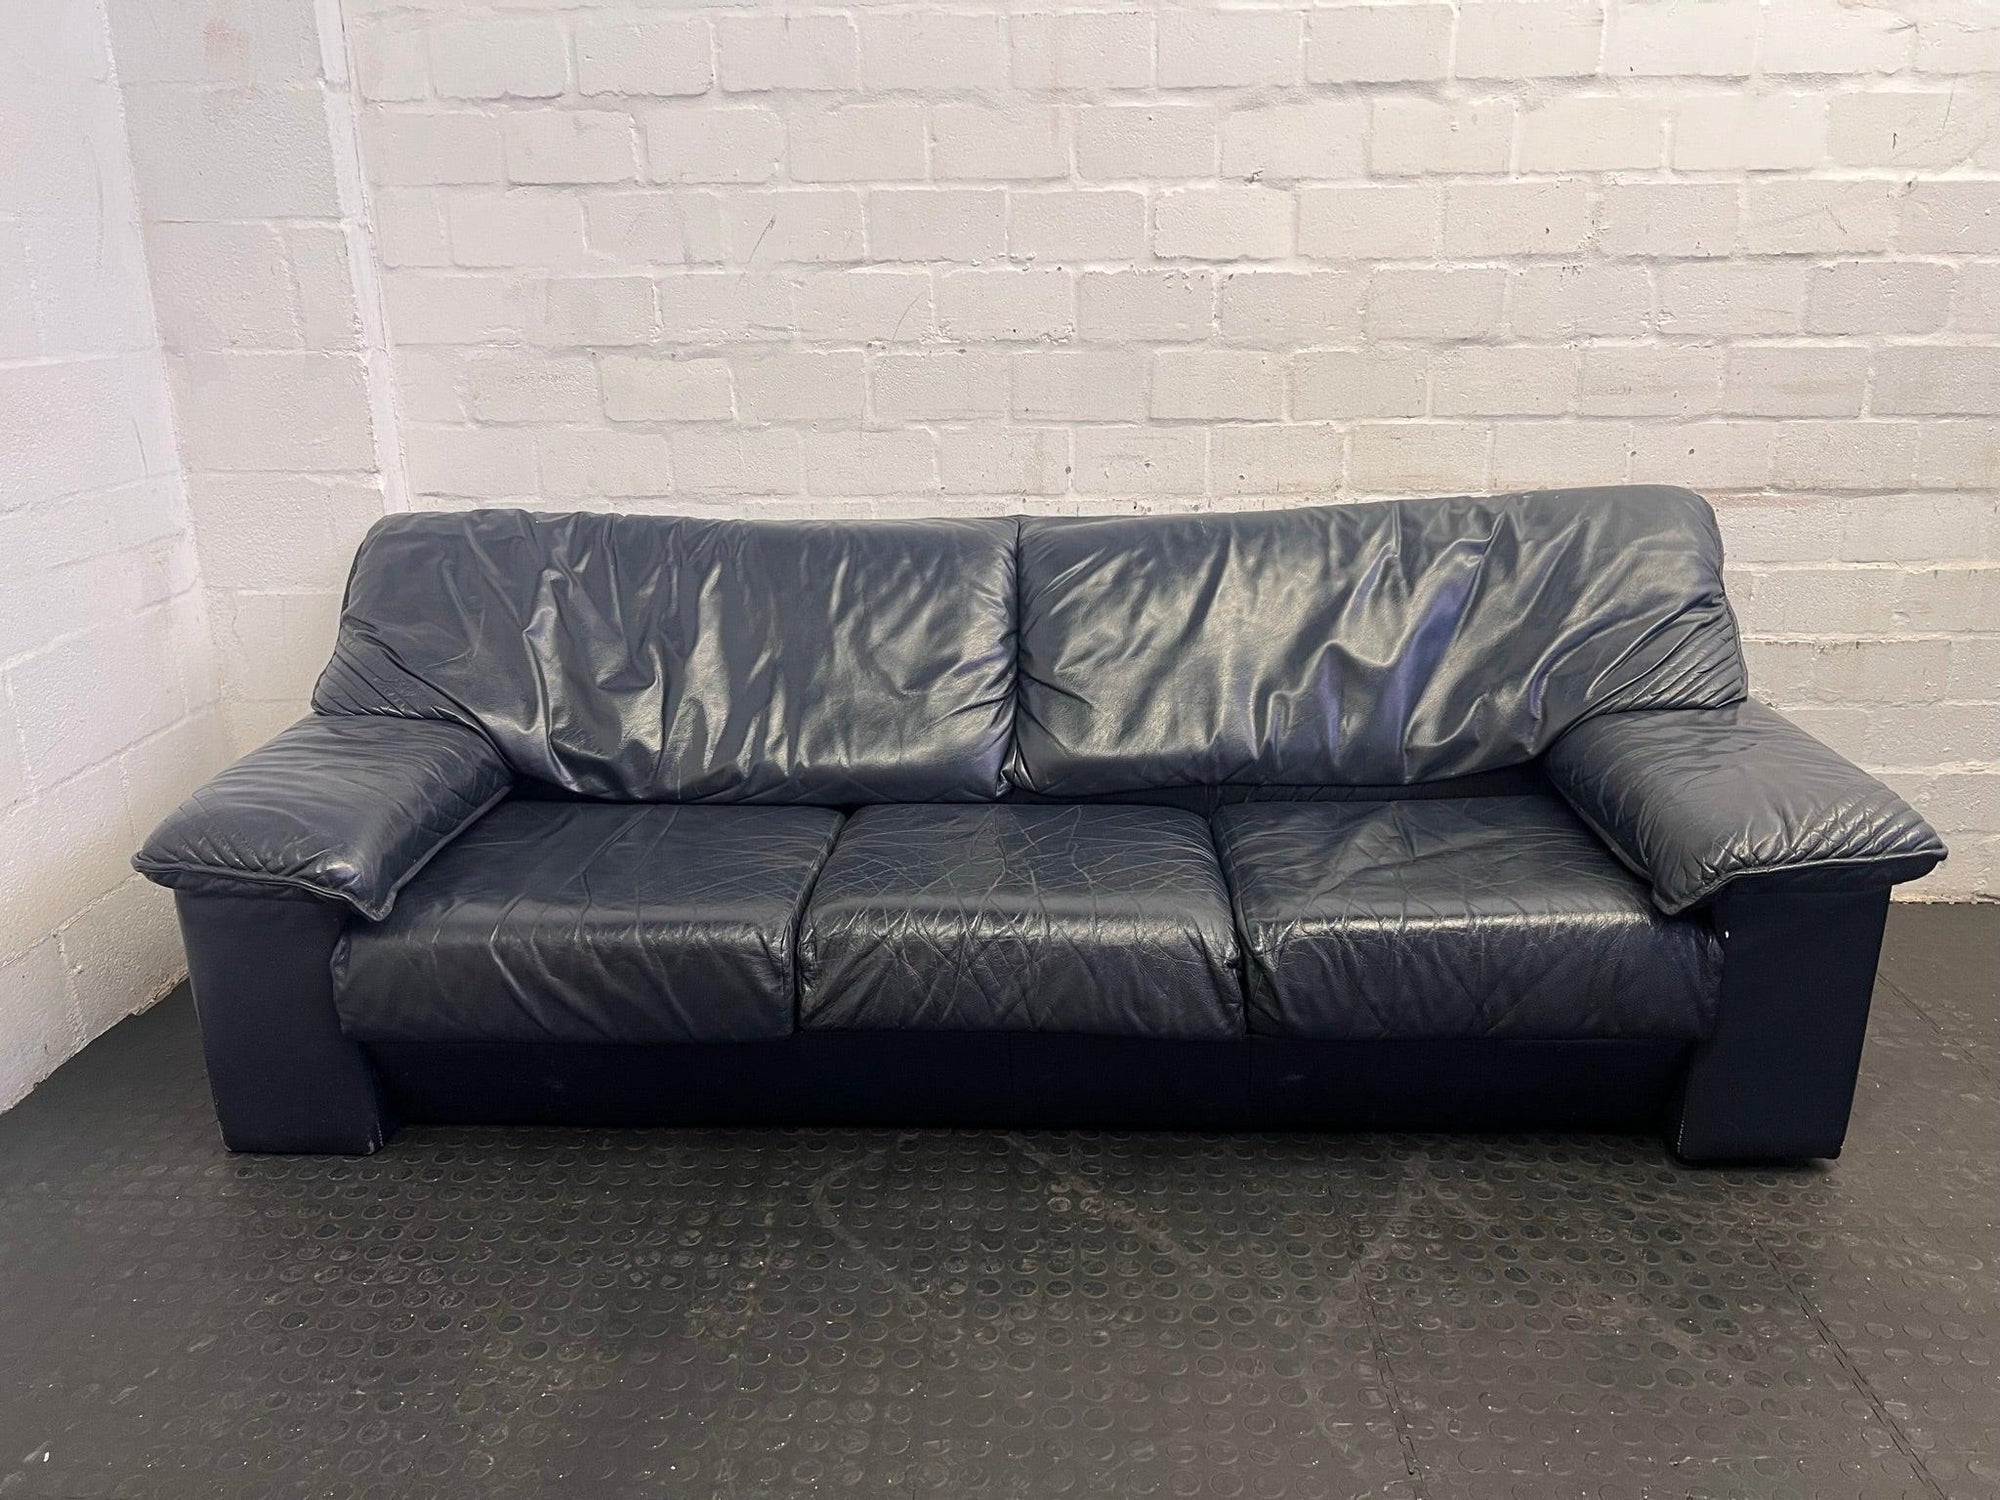 Black Pleather 3 Seater Couch (Damage To Underside) - REDUCED